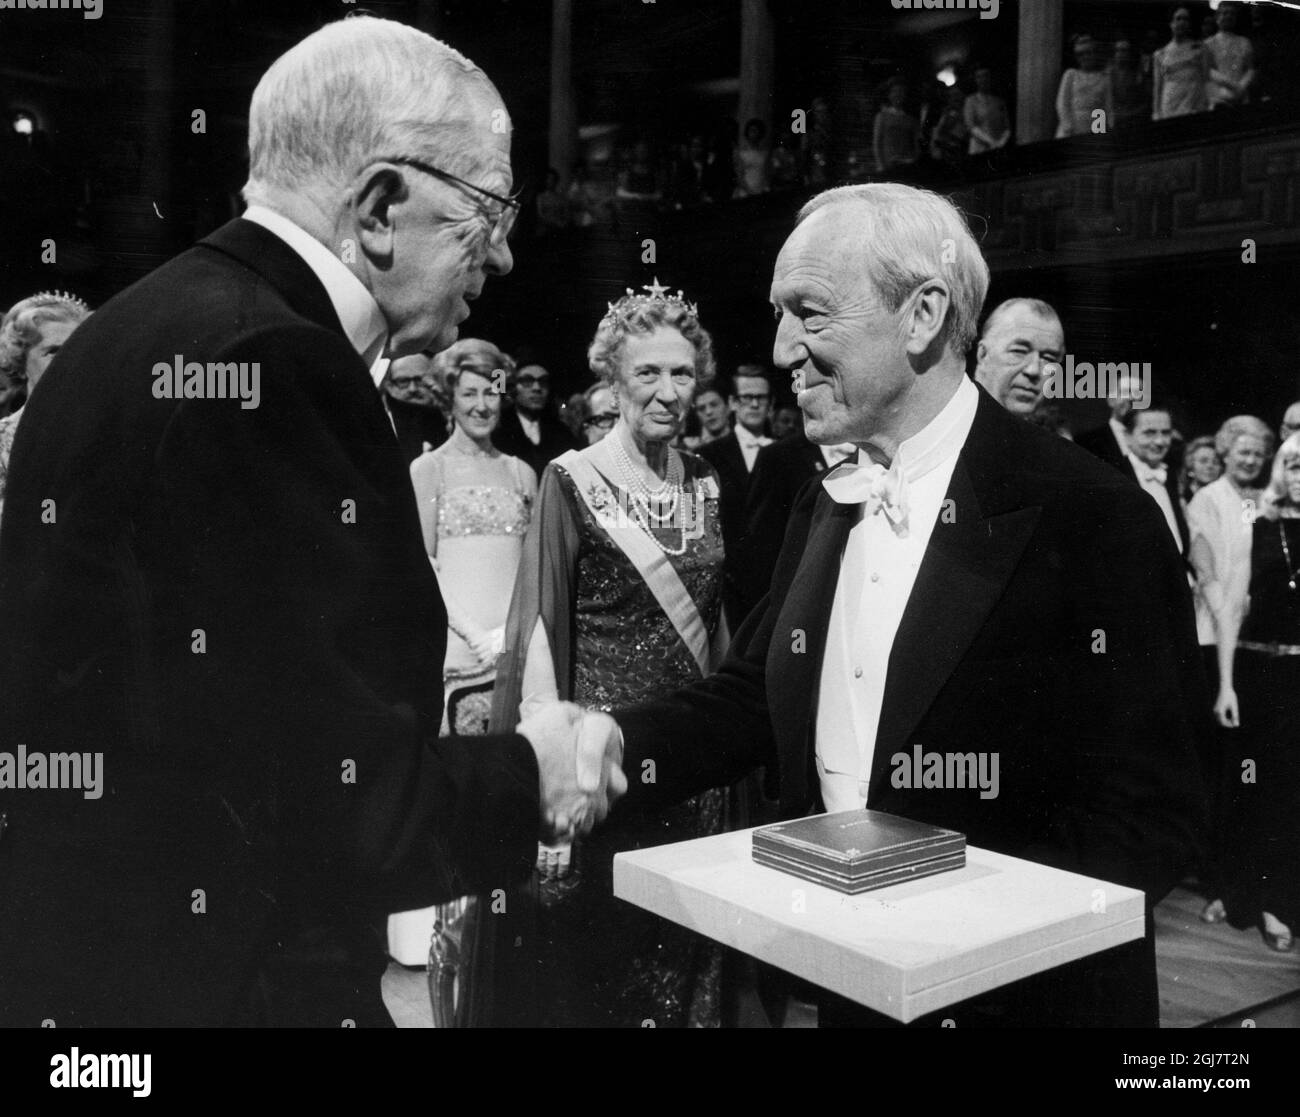 NOBEL PHYSICS:1970 - Physics laureate Hannes Alfvén from Sweden recieves his prize from the Swedish King Gustaf VI Adolf. Alfvén shares the prize with Louis Néel, France.  Foto: SCANPIX SWEDEN   Kod: 194  COPYRIGHT SCANPIX SWEDEN Stock Photo